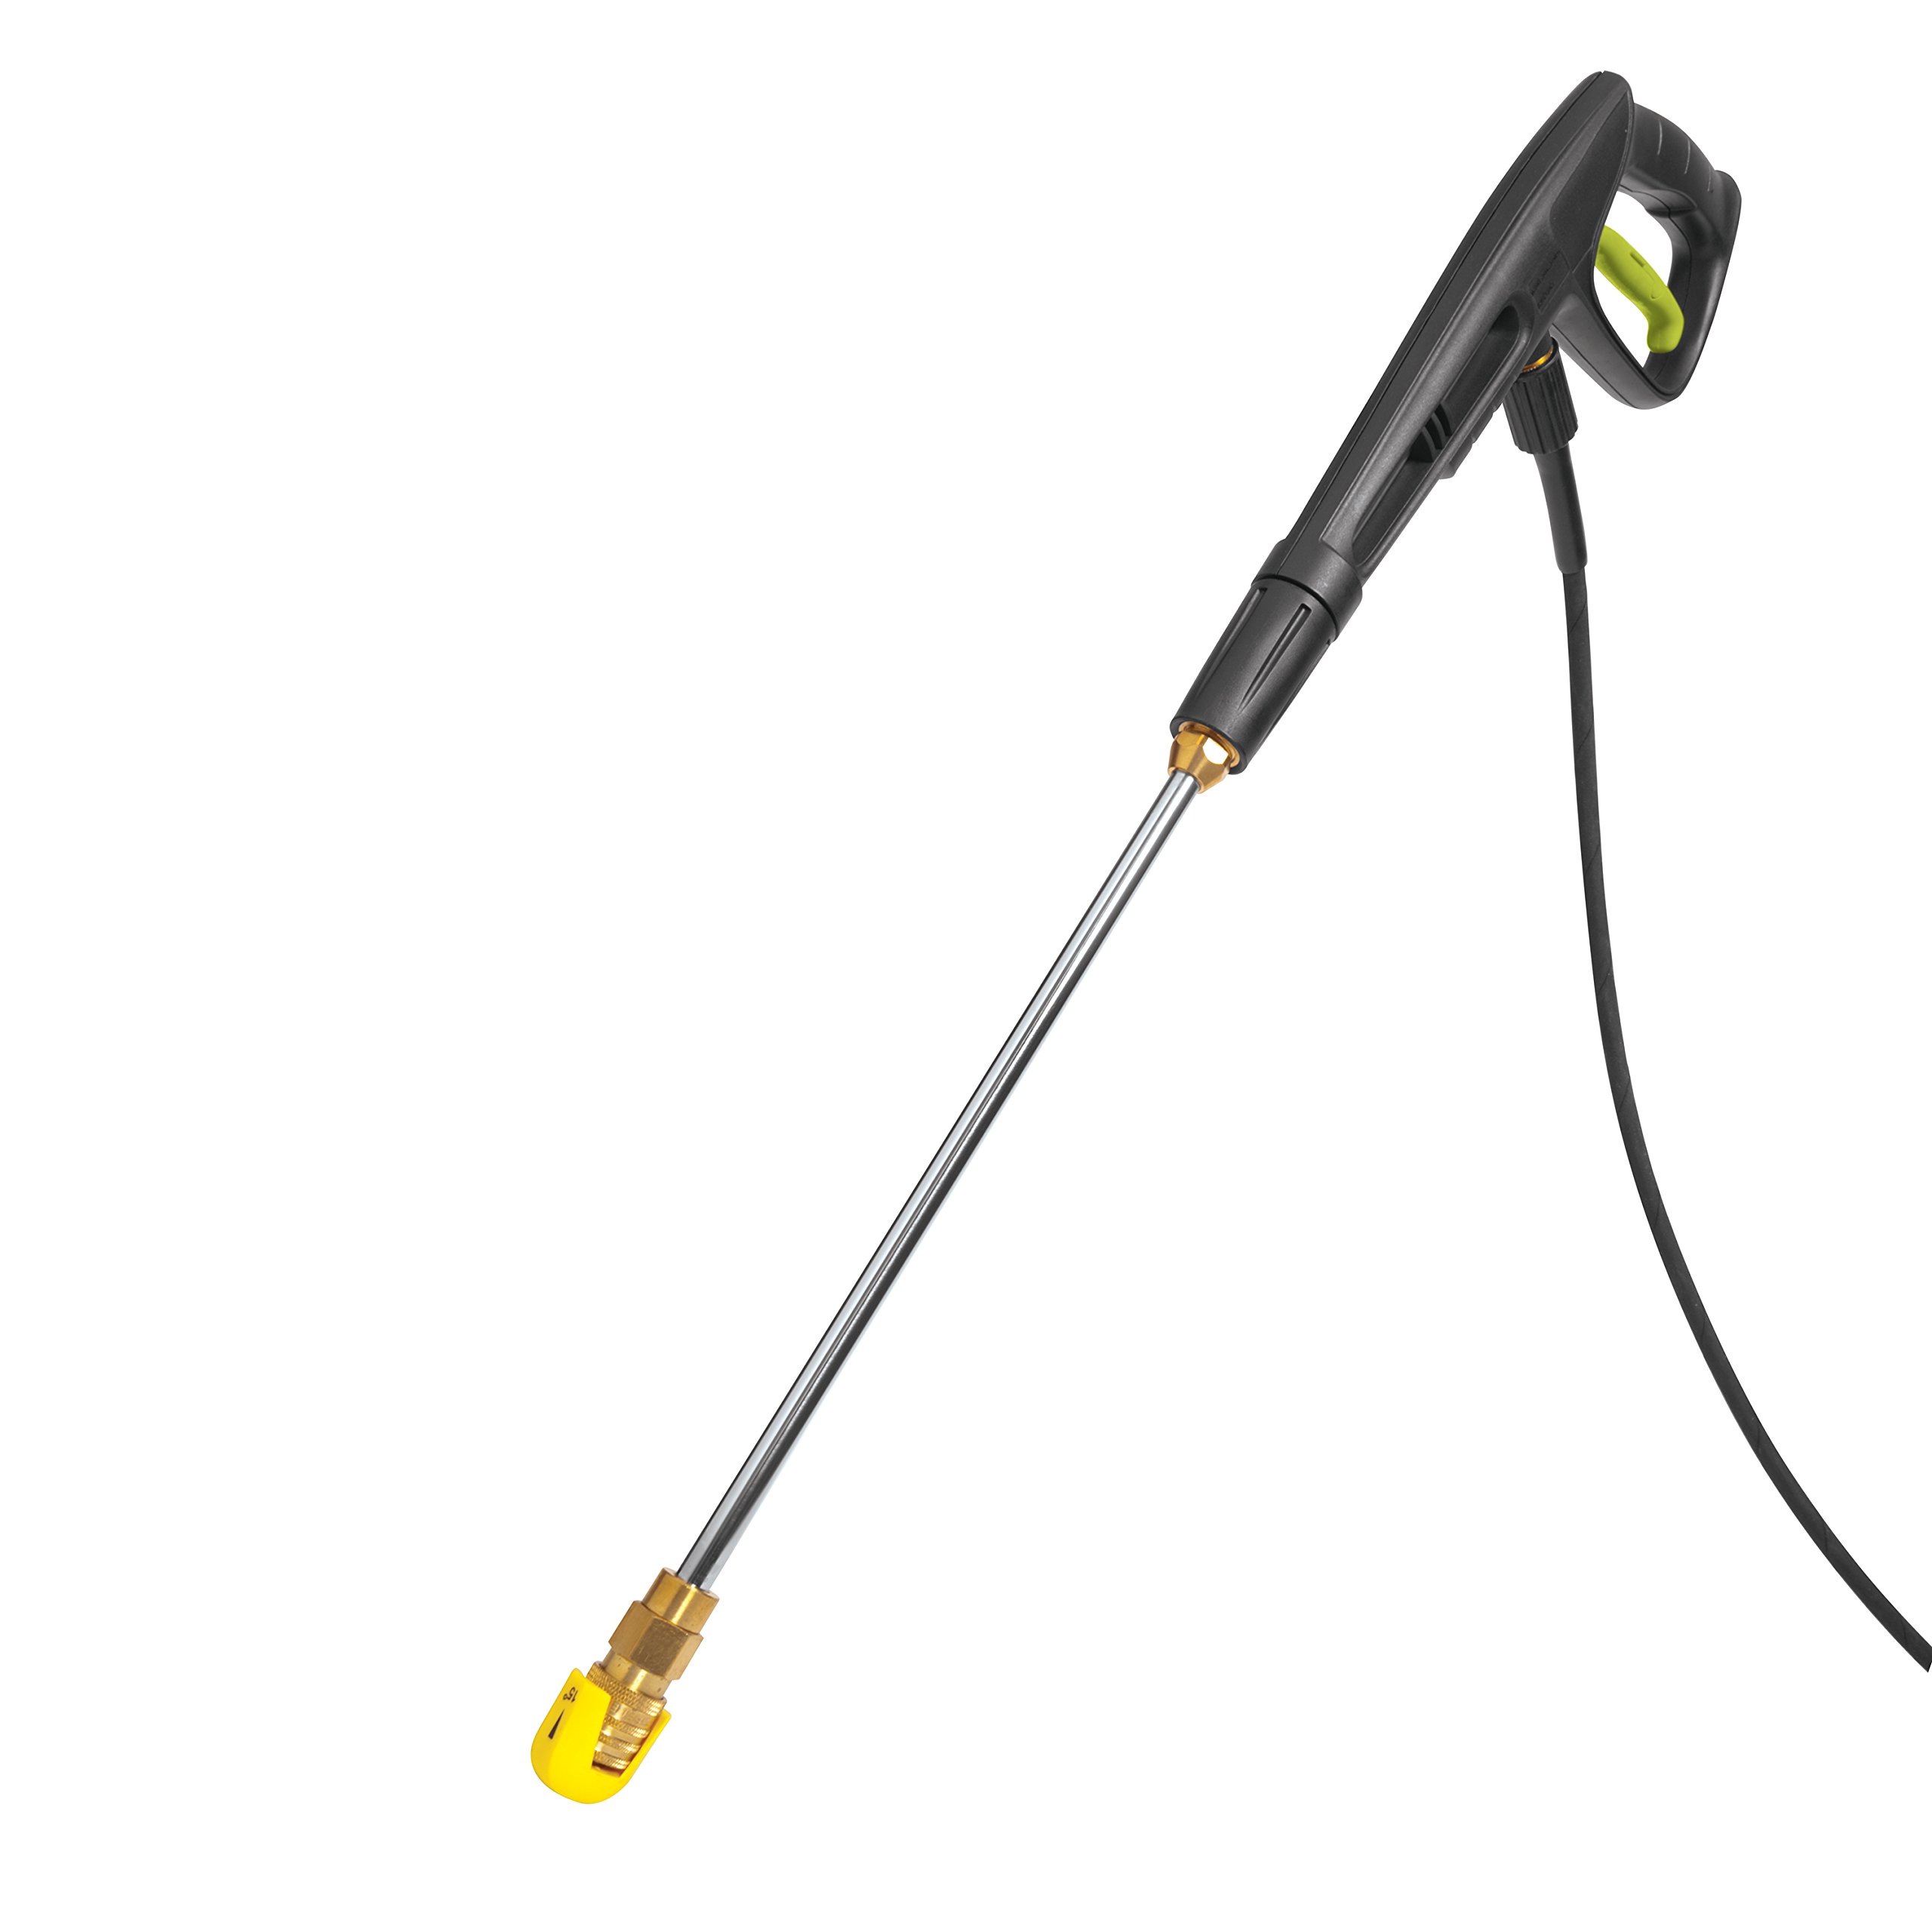 Sun Joe SPX3500 Brushless Induction Electric Pressure Washer, w/Brass Hose Connector